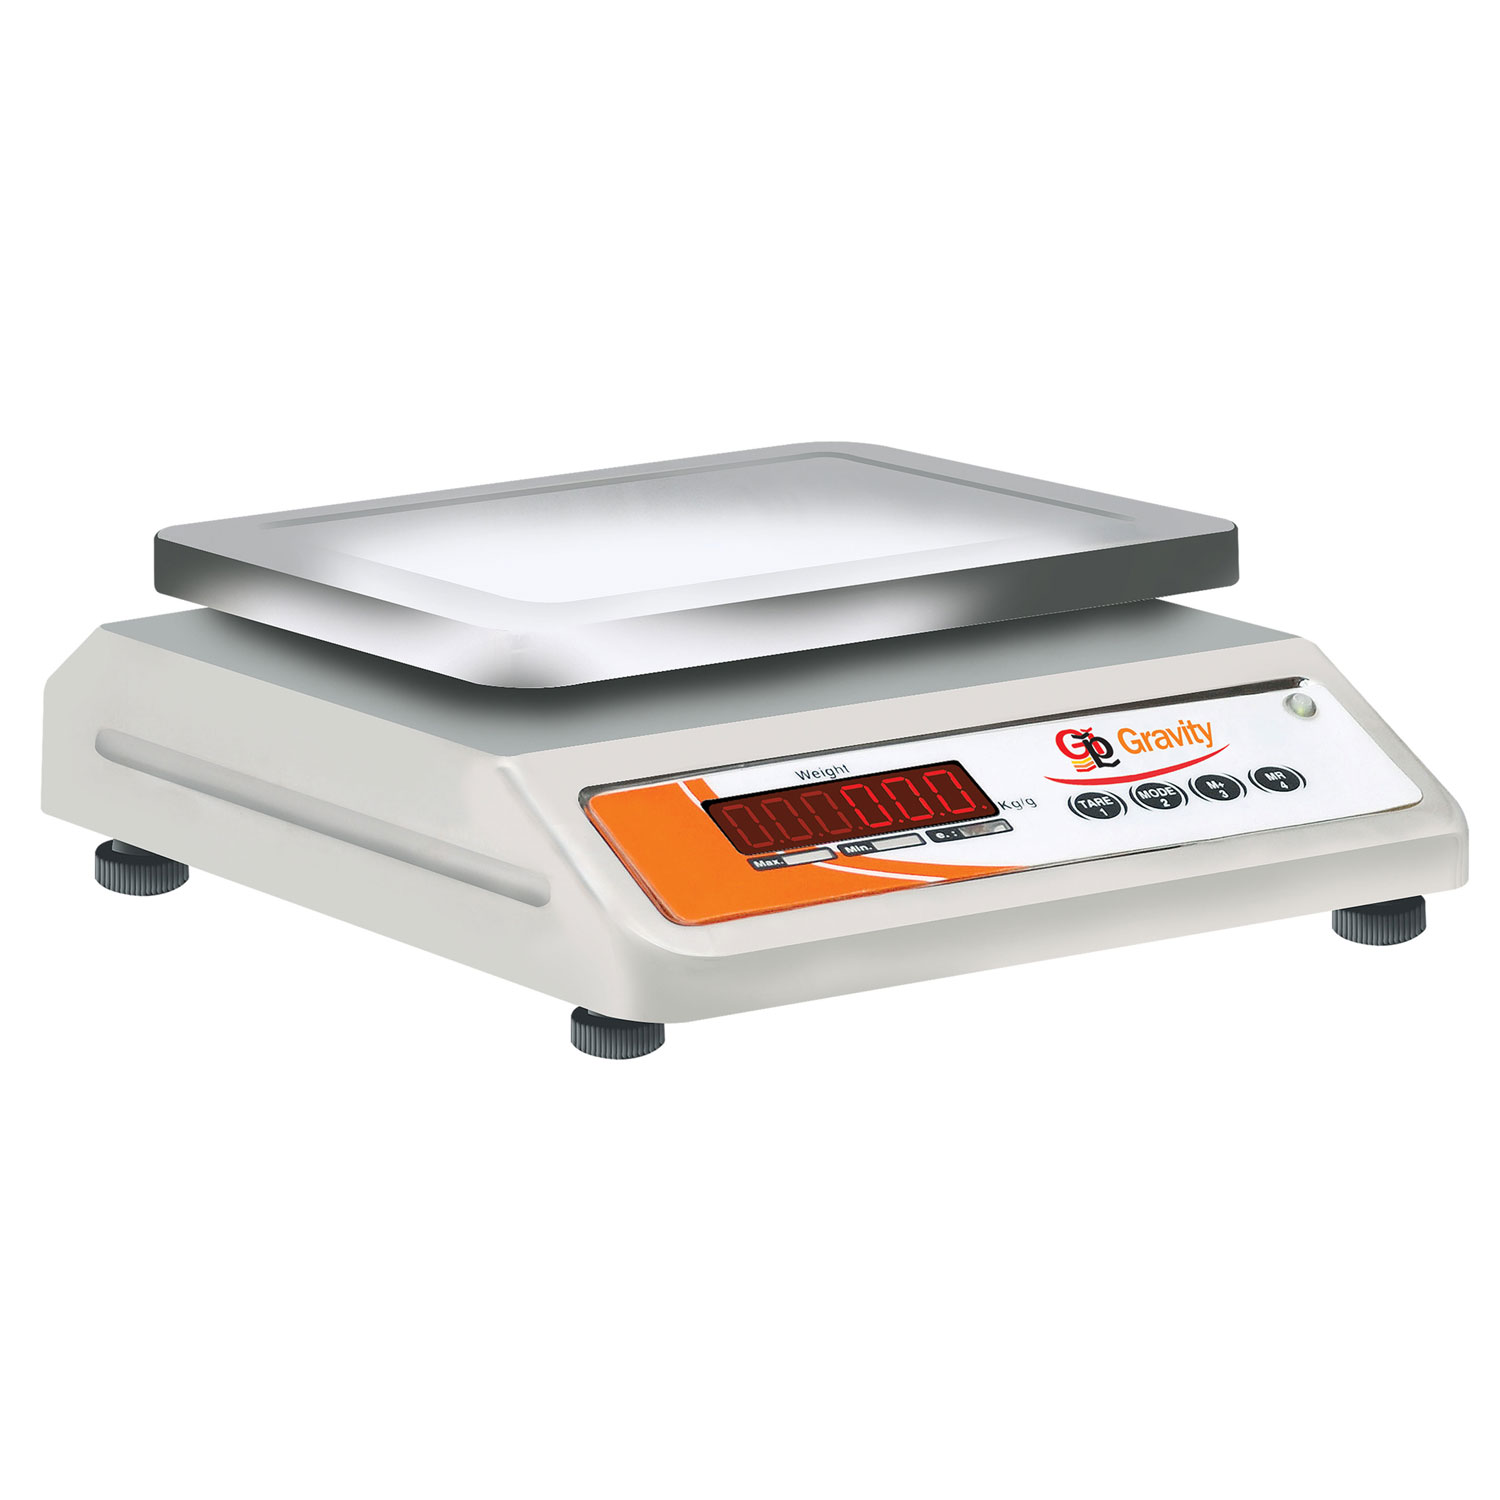 Buy GRAVITY 20 kg Weighing Machine, Eco GT5 - 20 - Weighing Scales ...